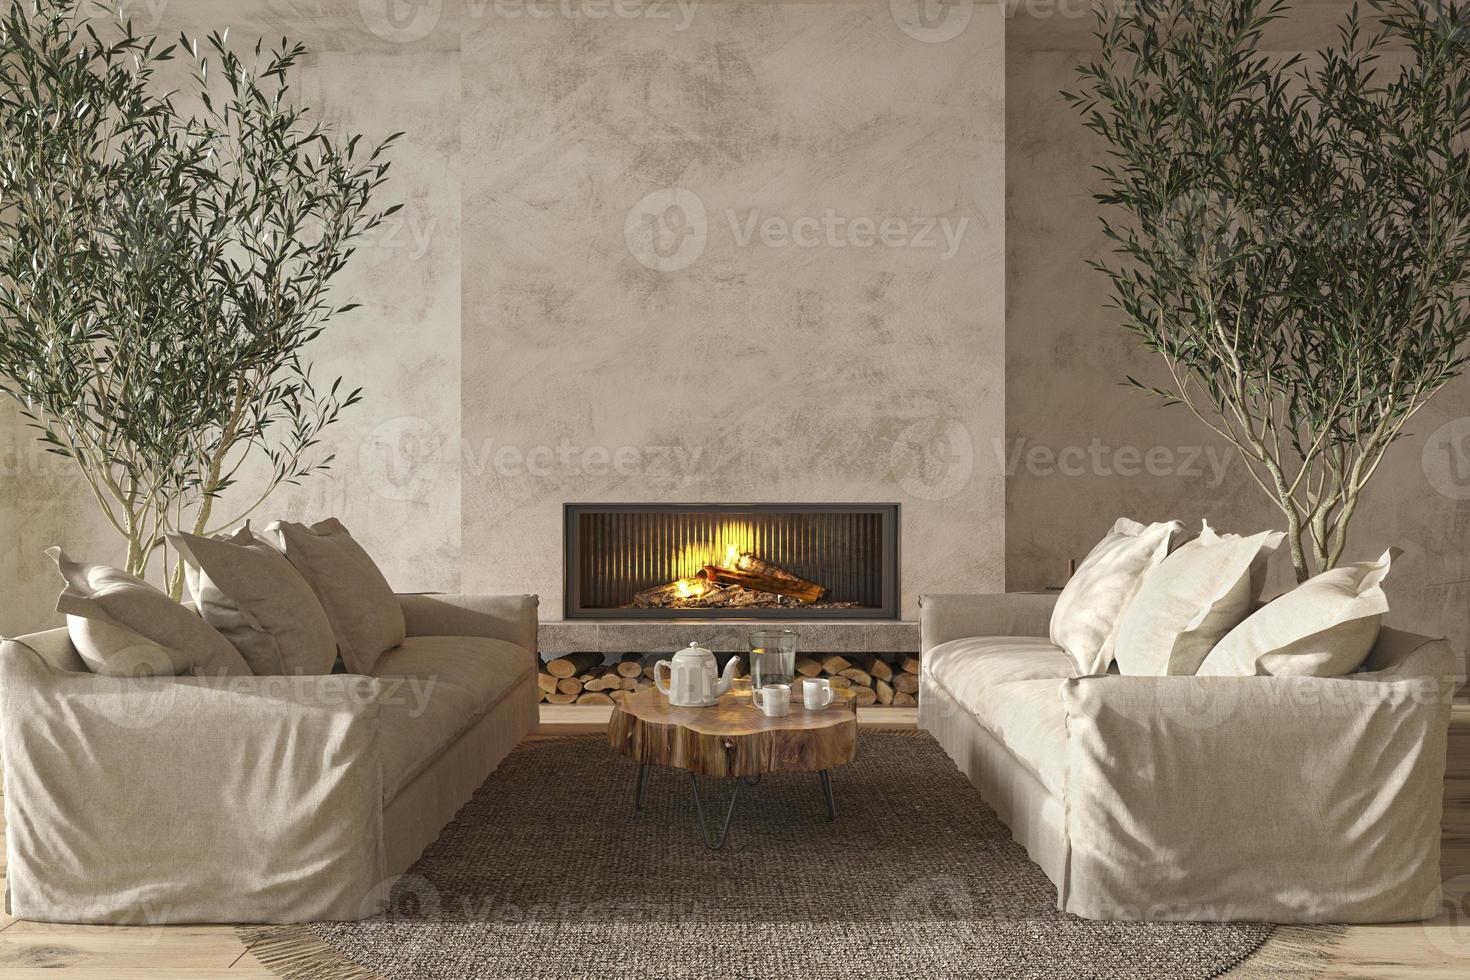 Scandinavian farmhouse style living room interior with natural wooden furniture and fireplace 3d render illustration photo